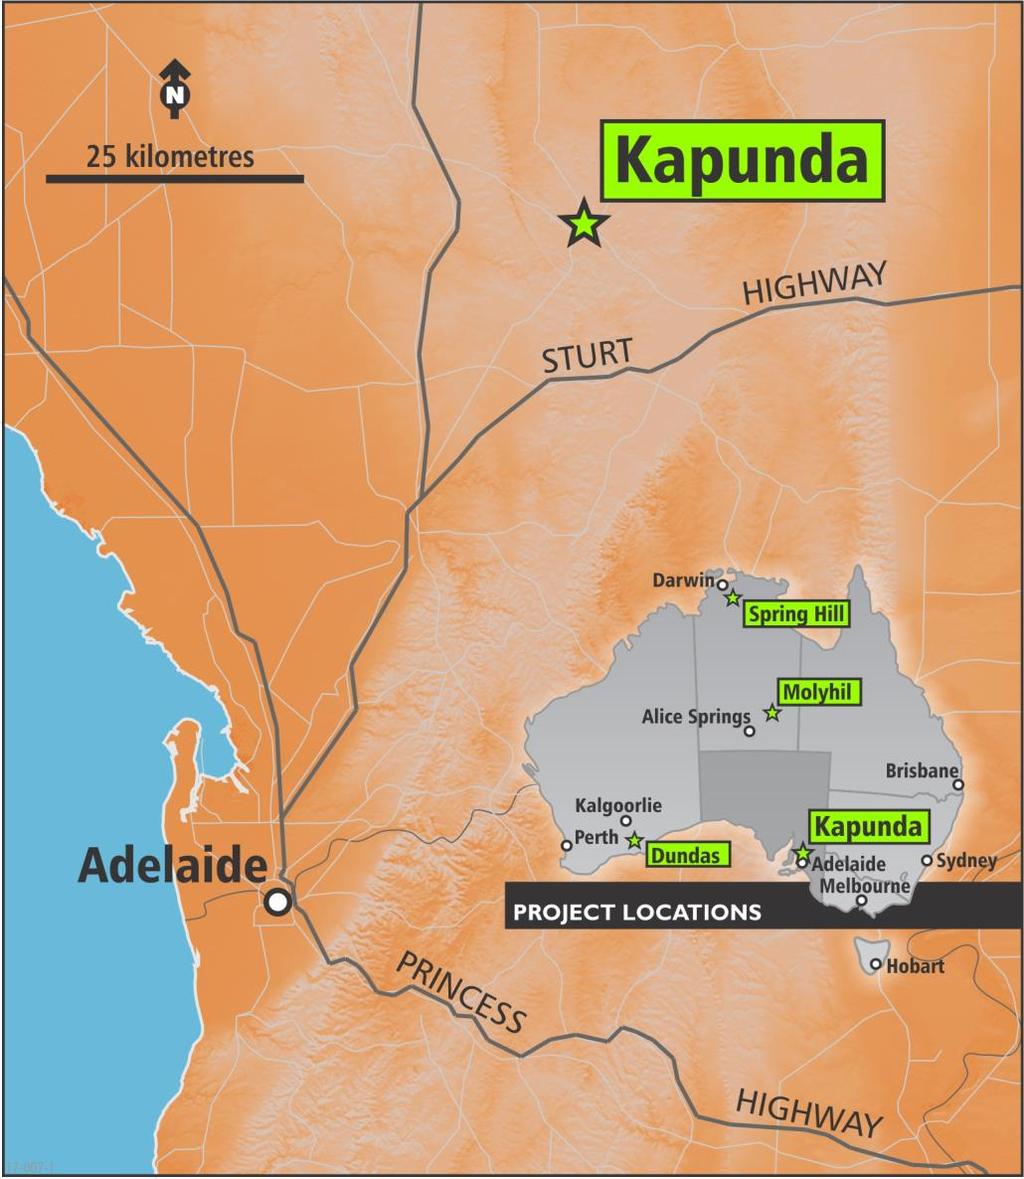 Kapunda is not an exploration project where we hope to find mineralisation. The presence of copper is well documented with significant prior production, and substantial historical drilling.